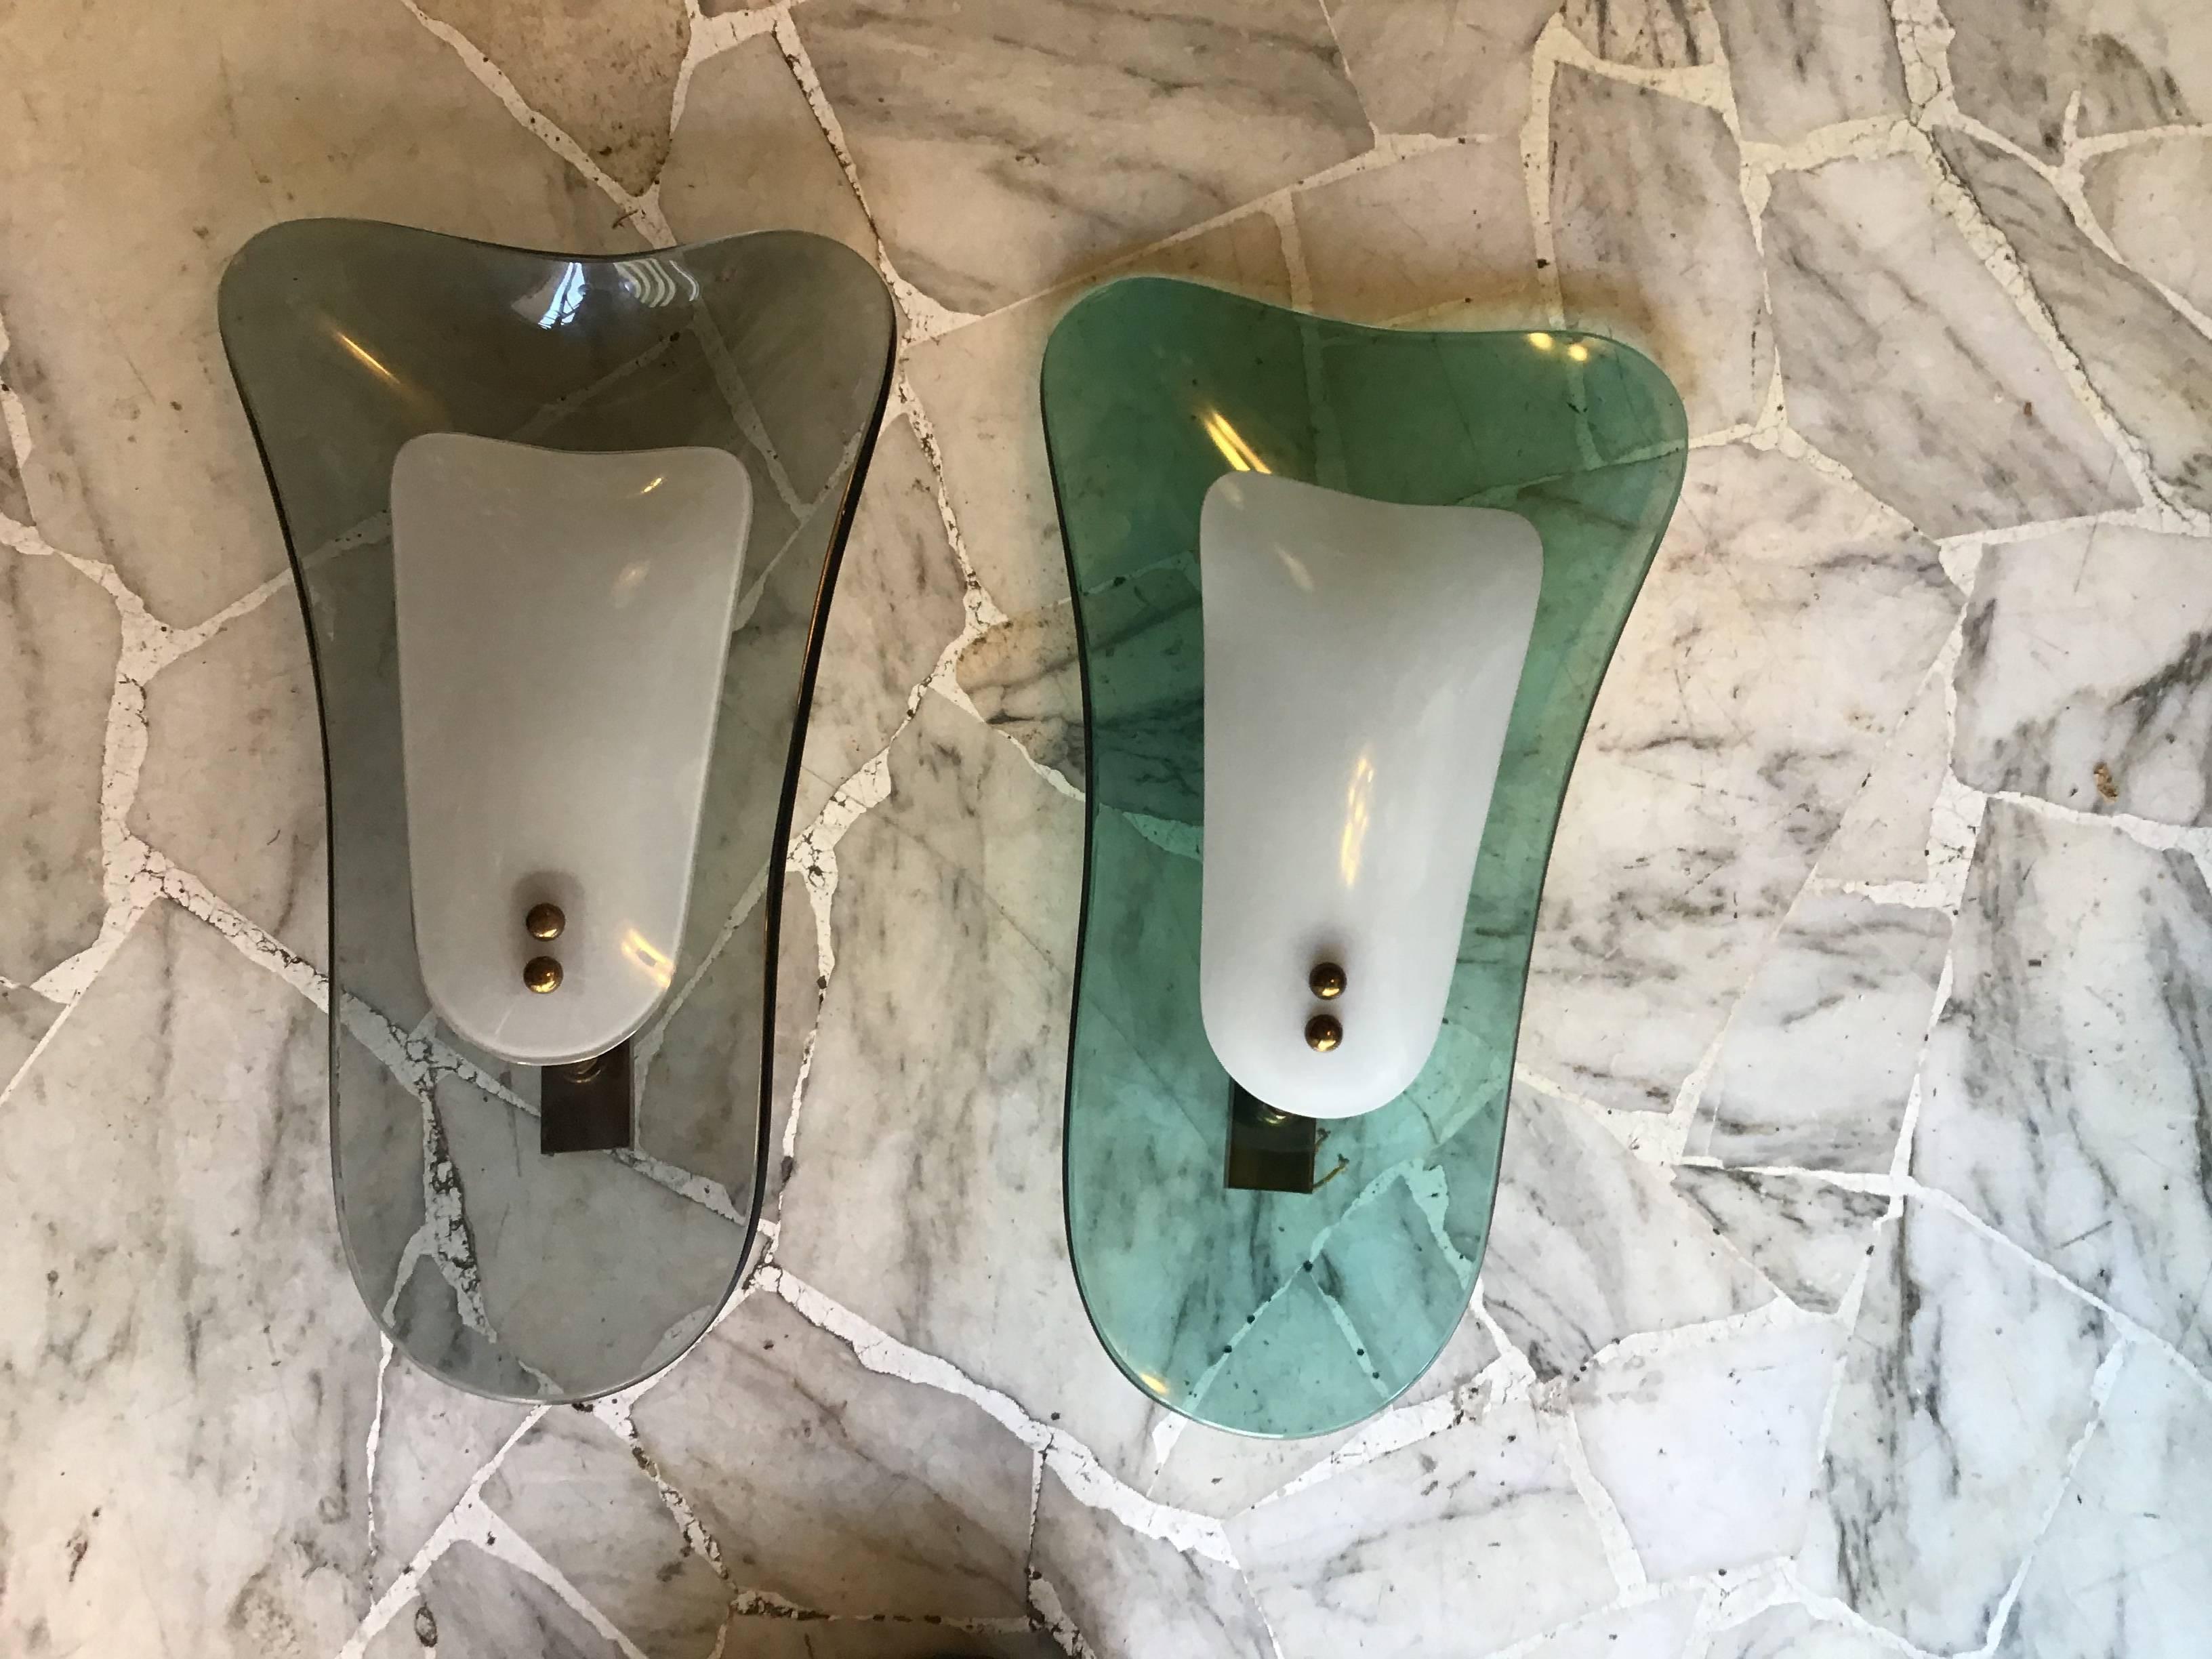 Exceptional sconces Fontana Arte 1960, one emerald green color, and one gray color. Glass and brass.